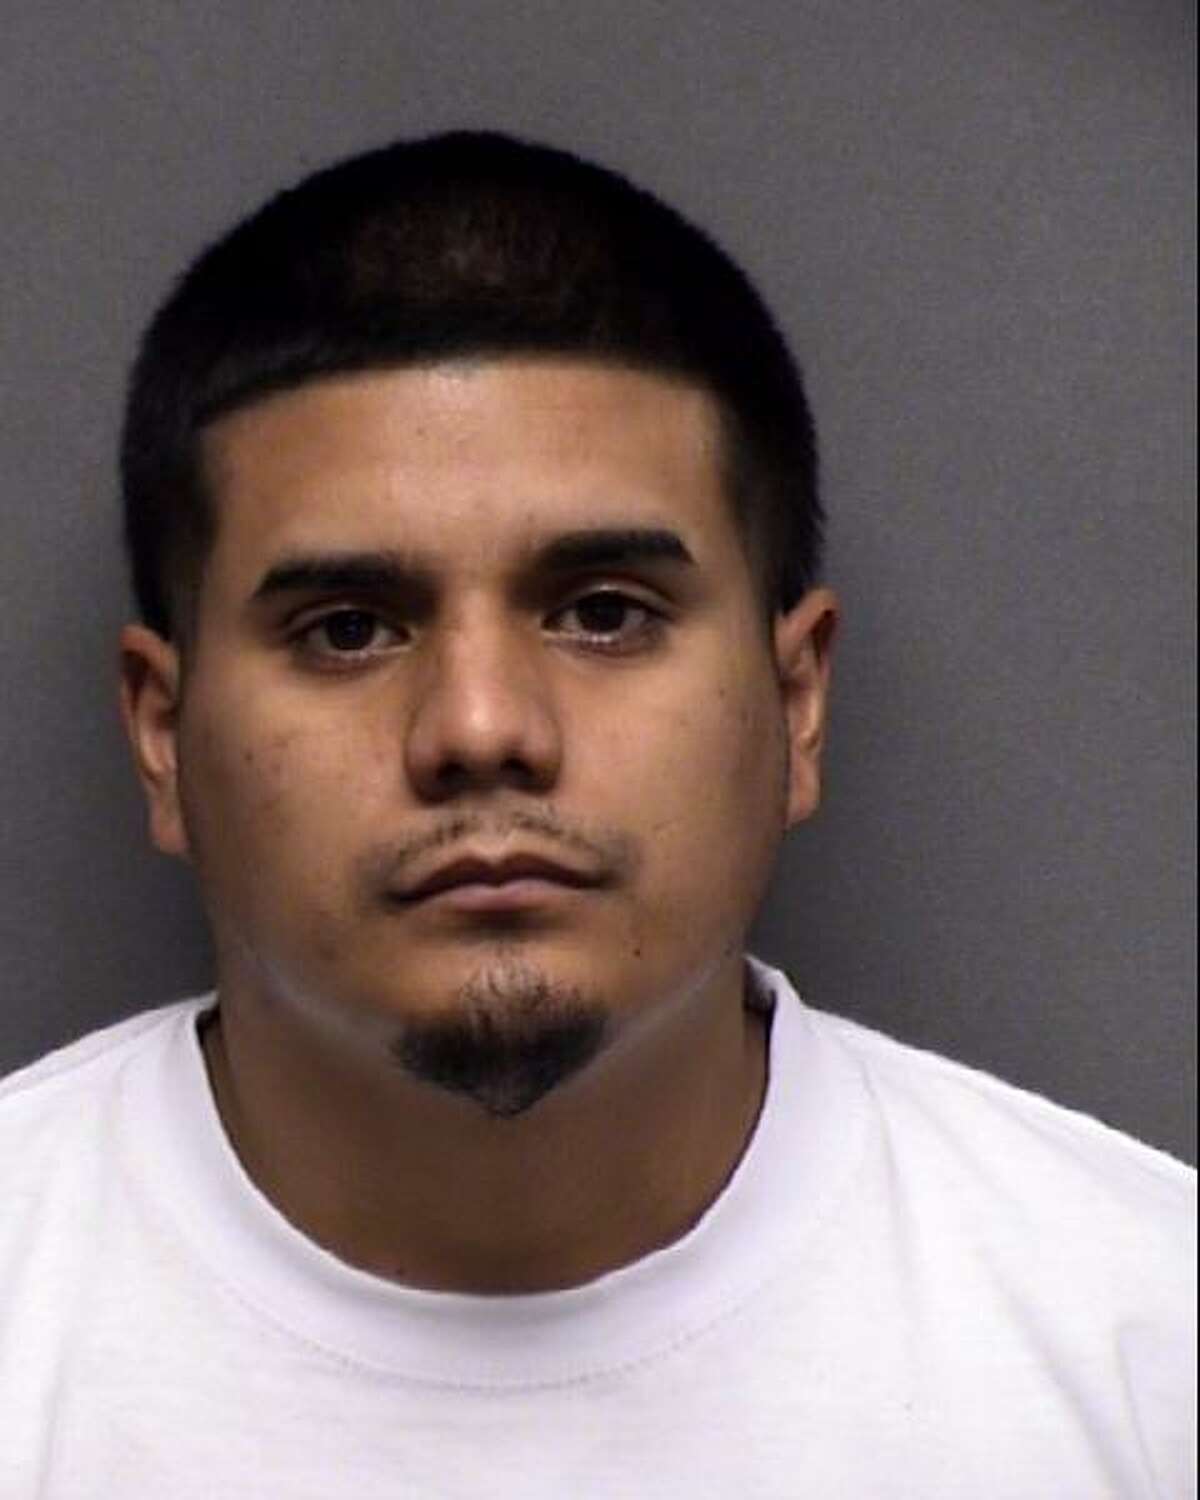 Aaron Gutierrez, 24, was charged with murder in connection with the death of Maria Gonzales outside an East Side bar.